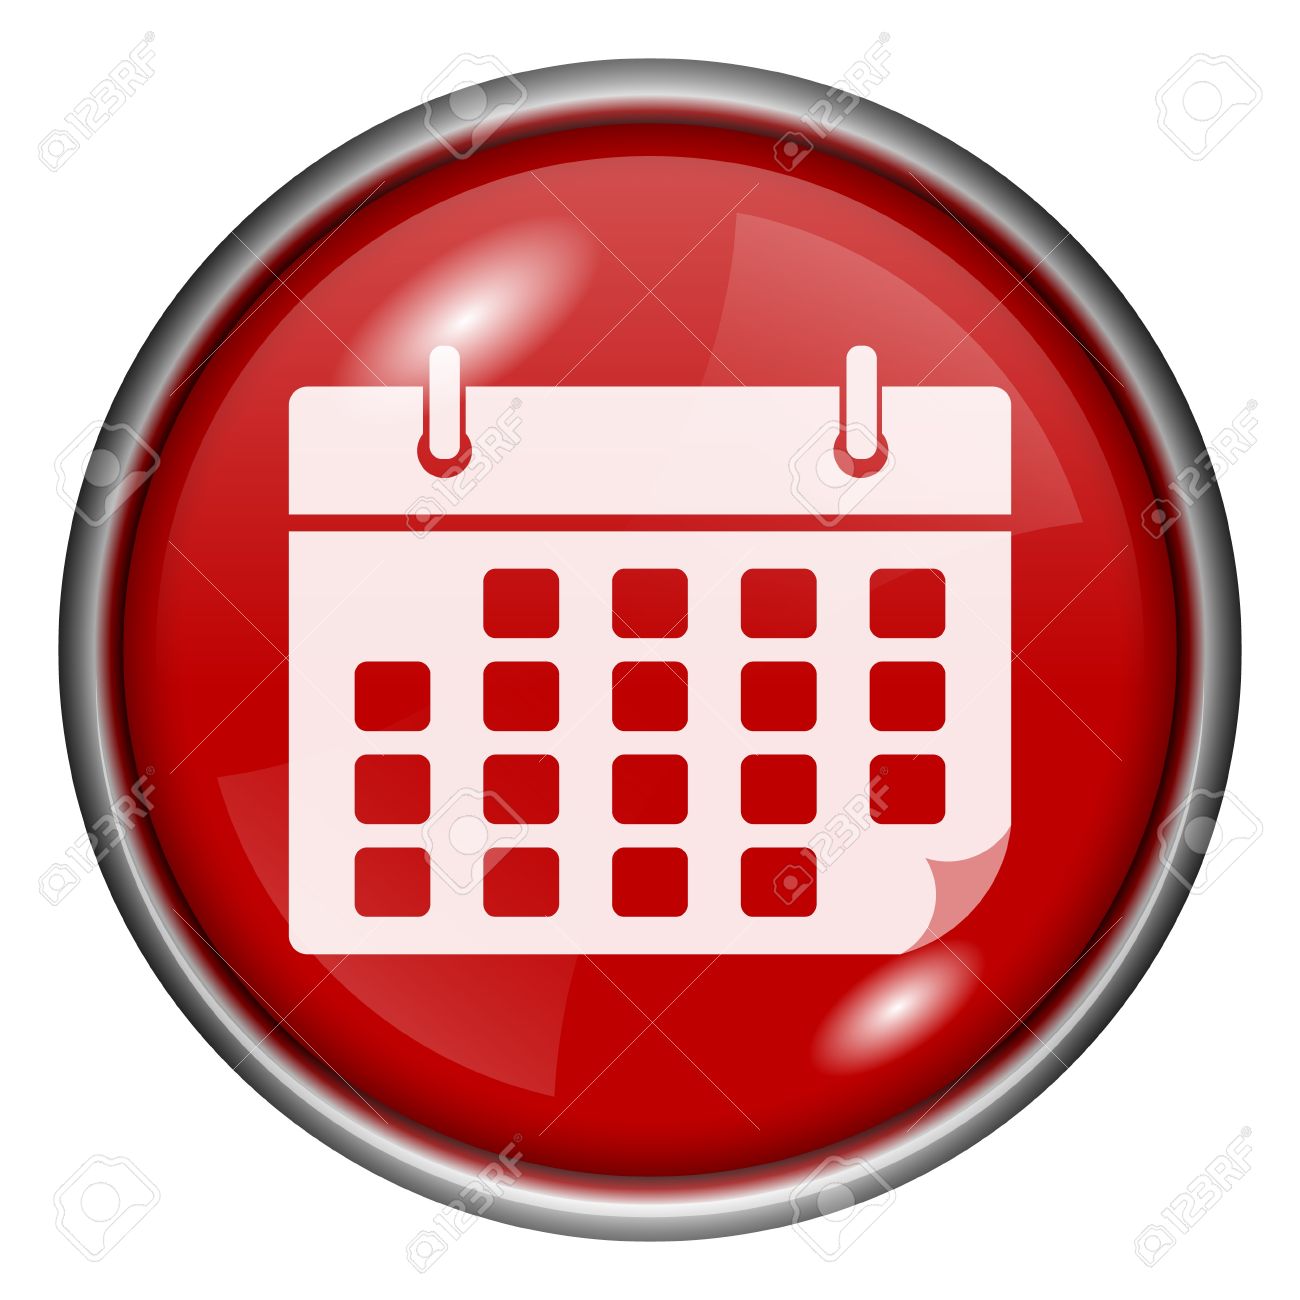 Red Round Glossy Calendar Icon With White Design On Red Background 